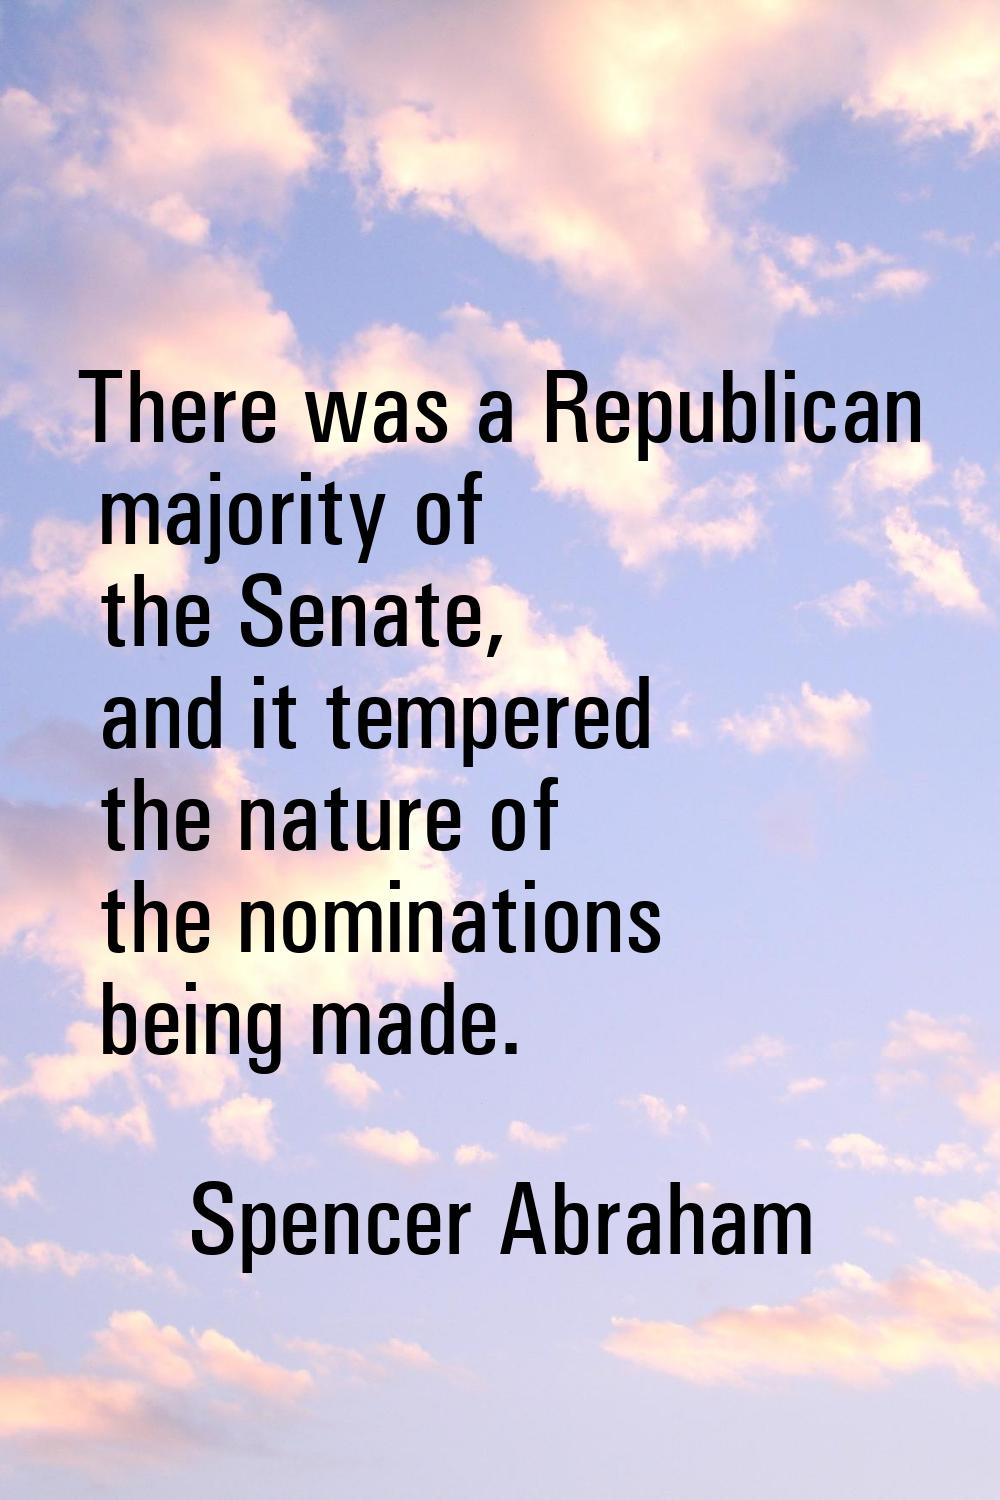 There was a Republican majority of the Senate, and it tempered the nature of the nominations being 